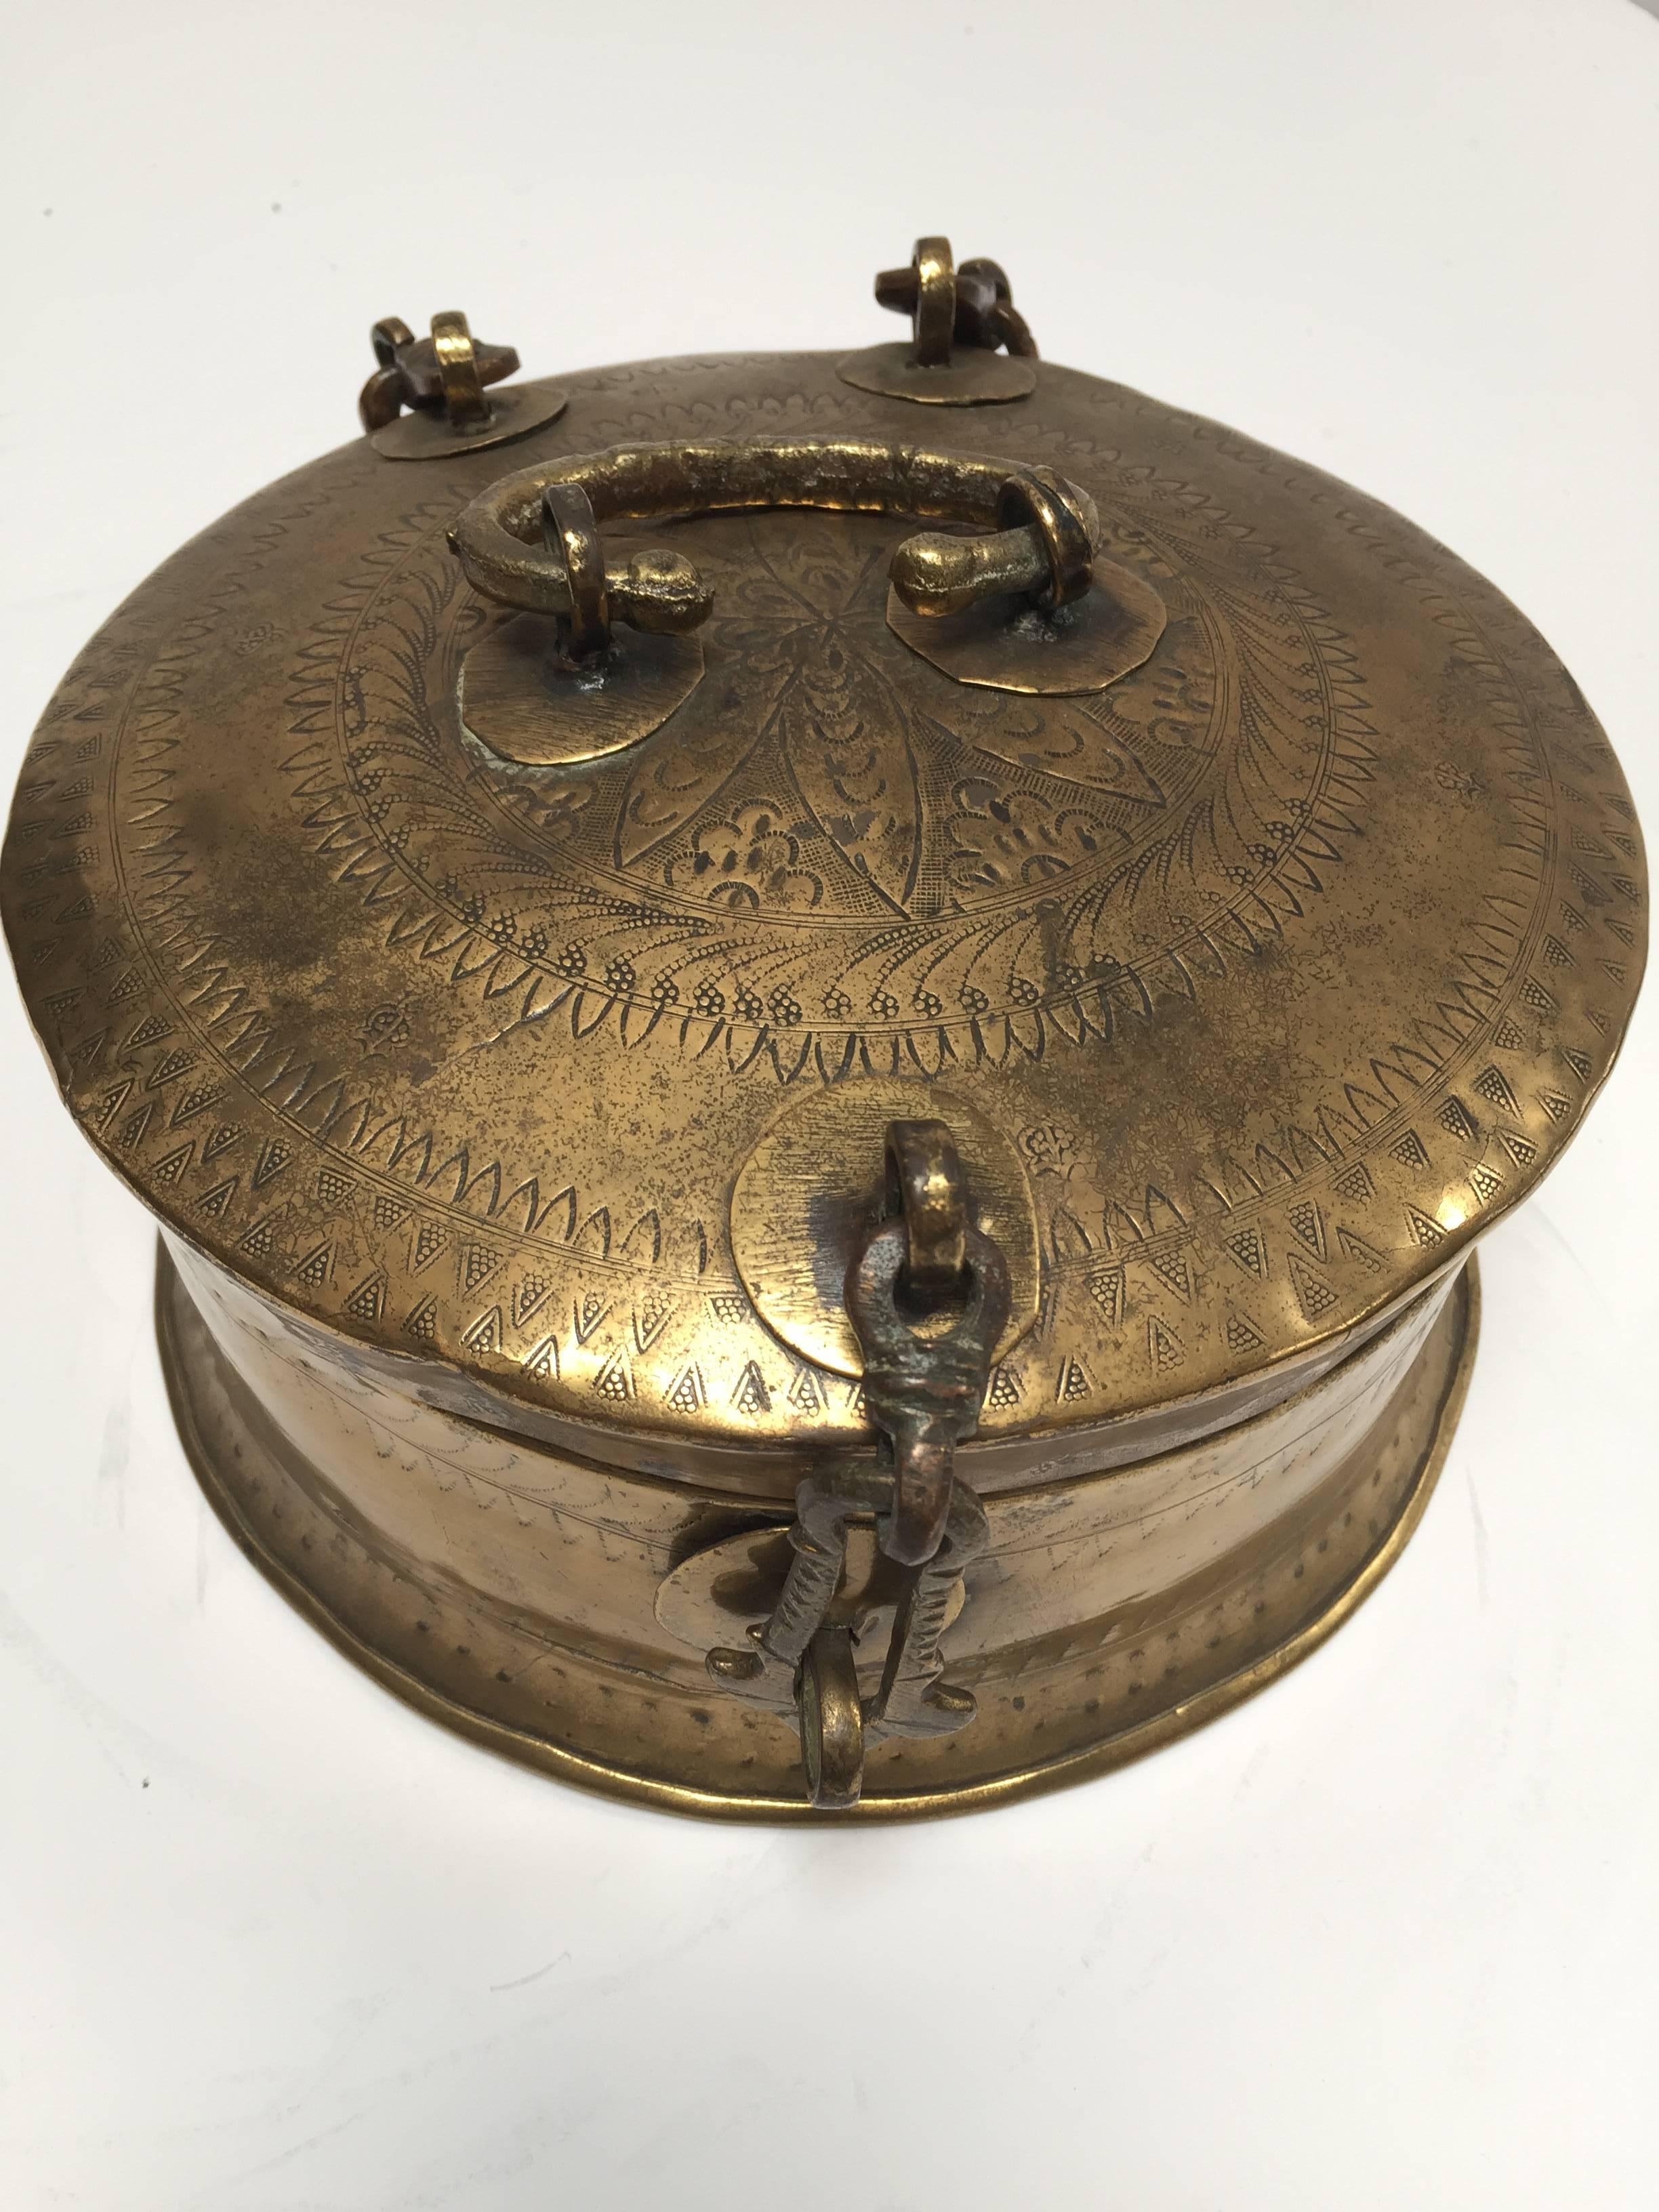 Handcrafted decorative round brass Anglo Indian lidded box with latch and a top handle.
Delicately and intricately hand-chased with geometric designs. 
Probably used as a tea caddy. 
Exquisite conversation museum quality piece with a very nice